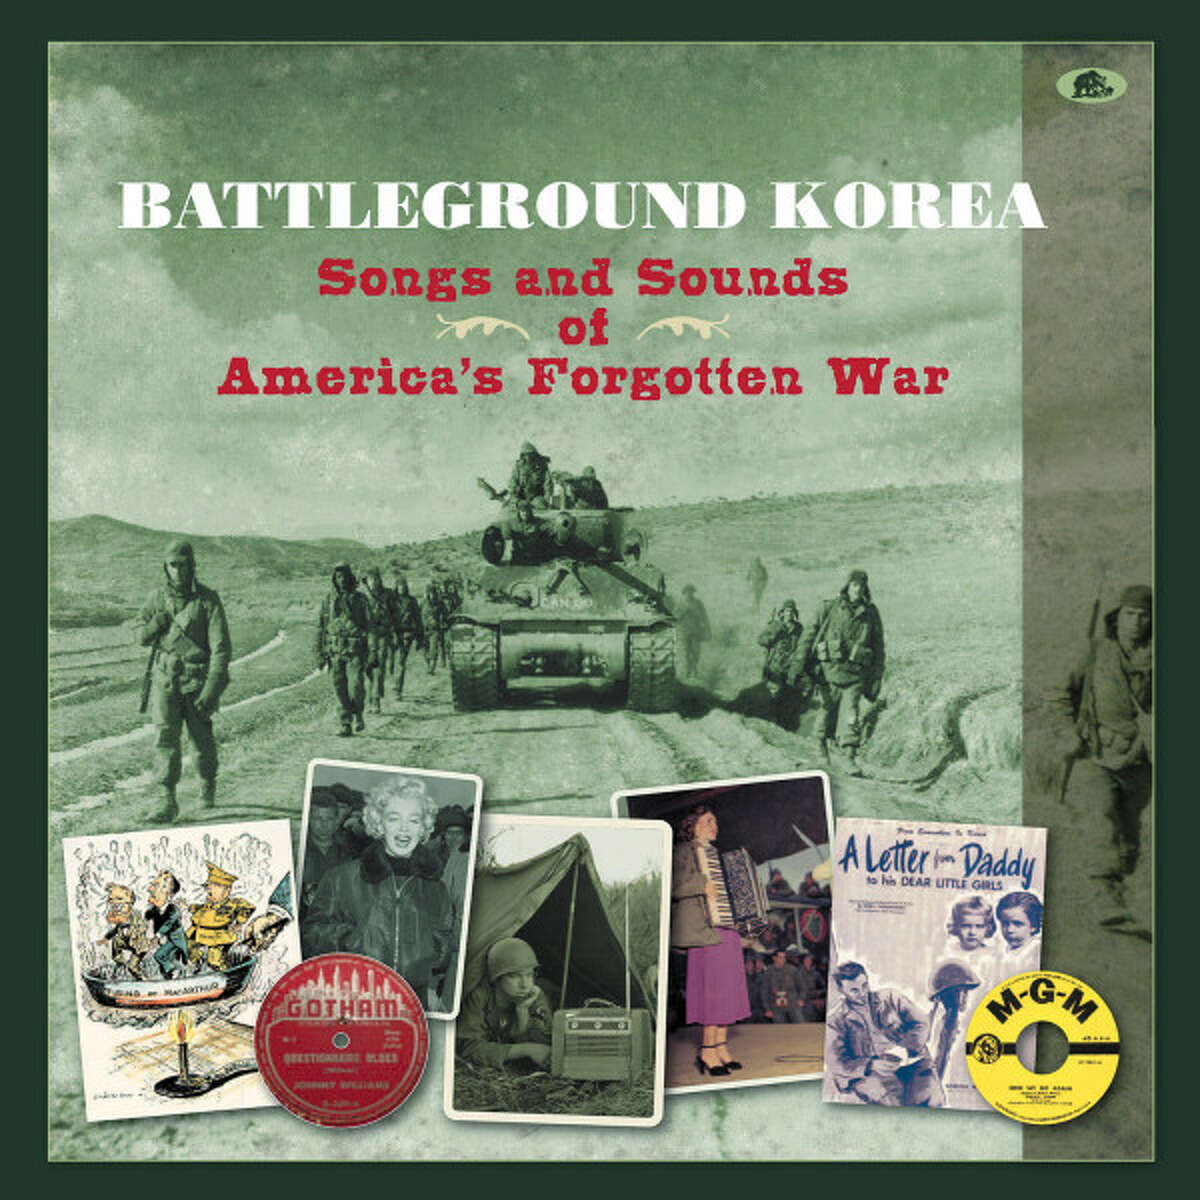 Cover image for the music set "Battlefield Korea," released by Bear Family